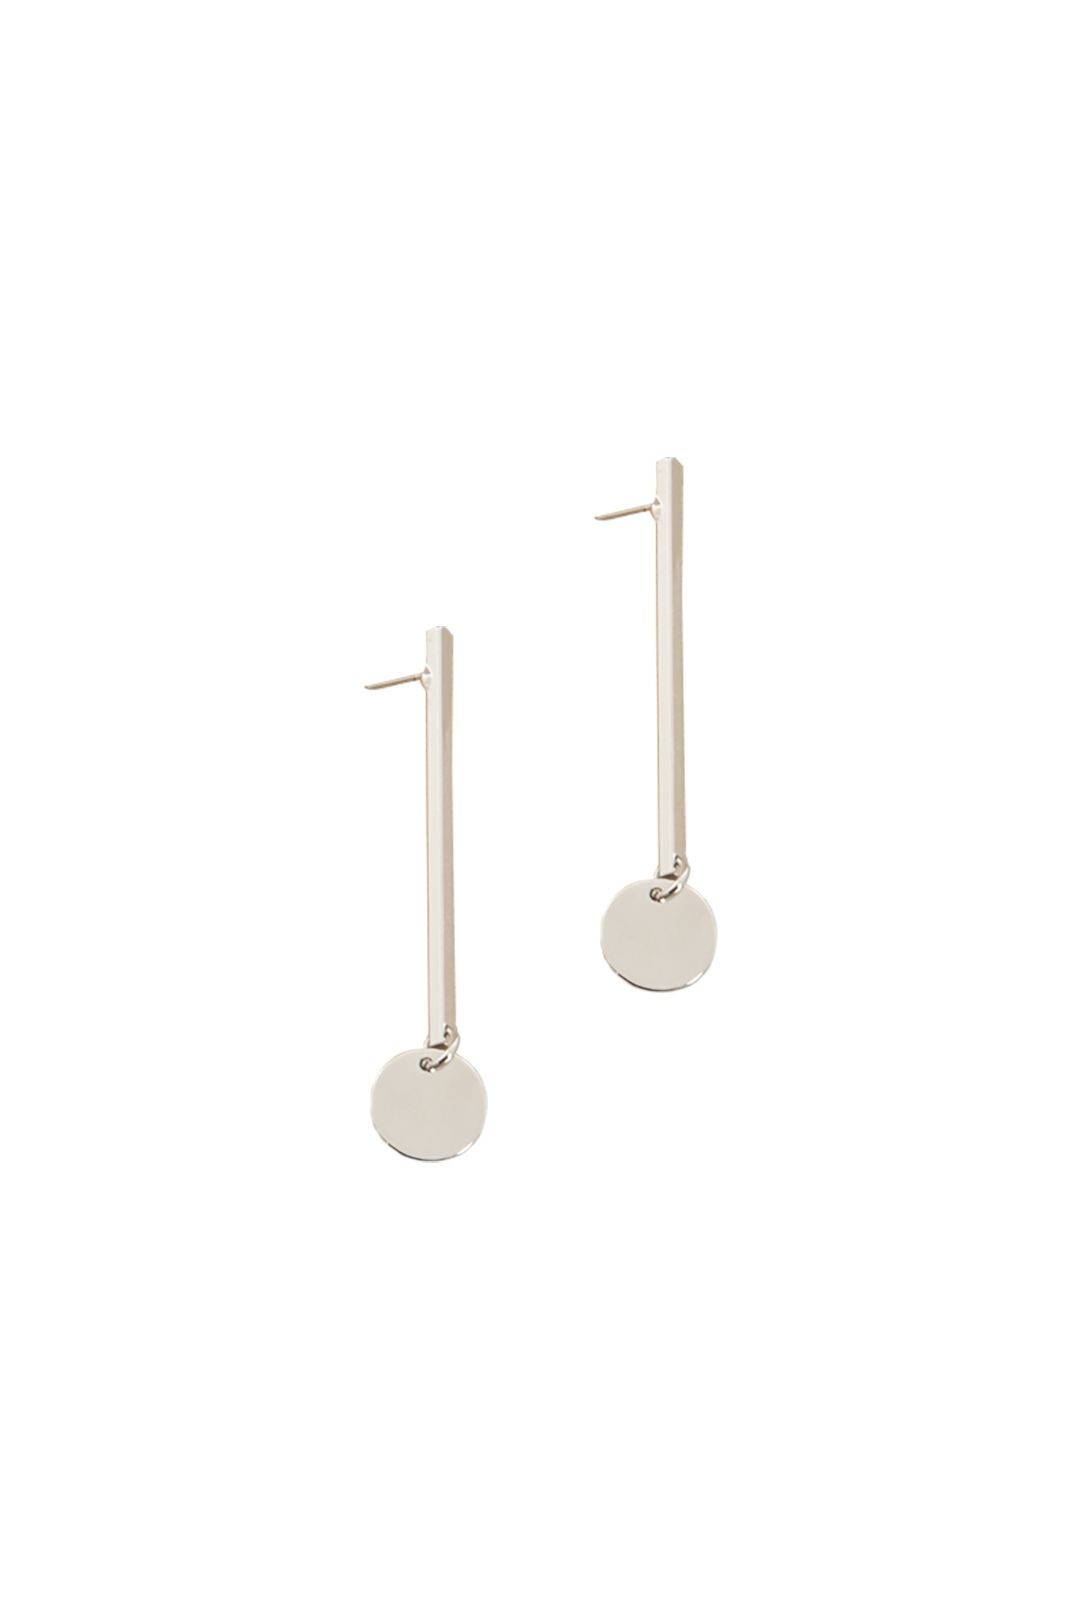 Adorne - Rod and Disc Drop Earring - Silver - Front